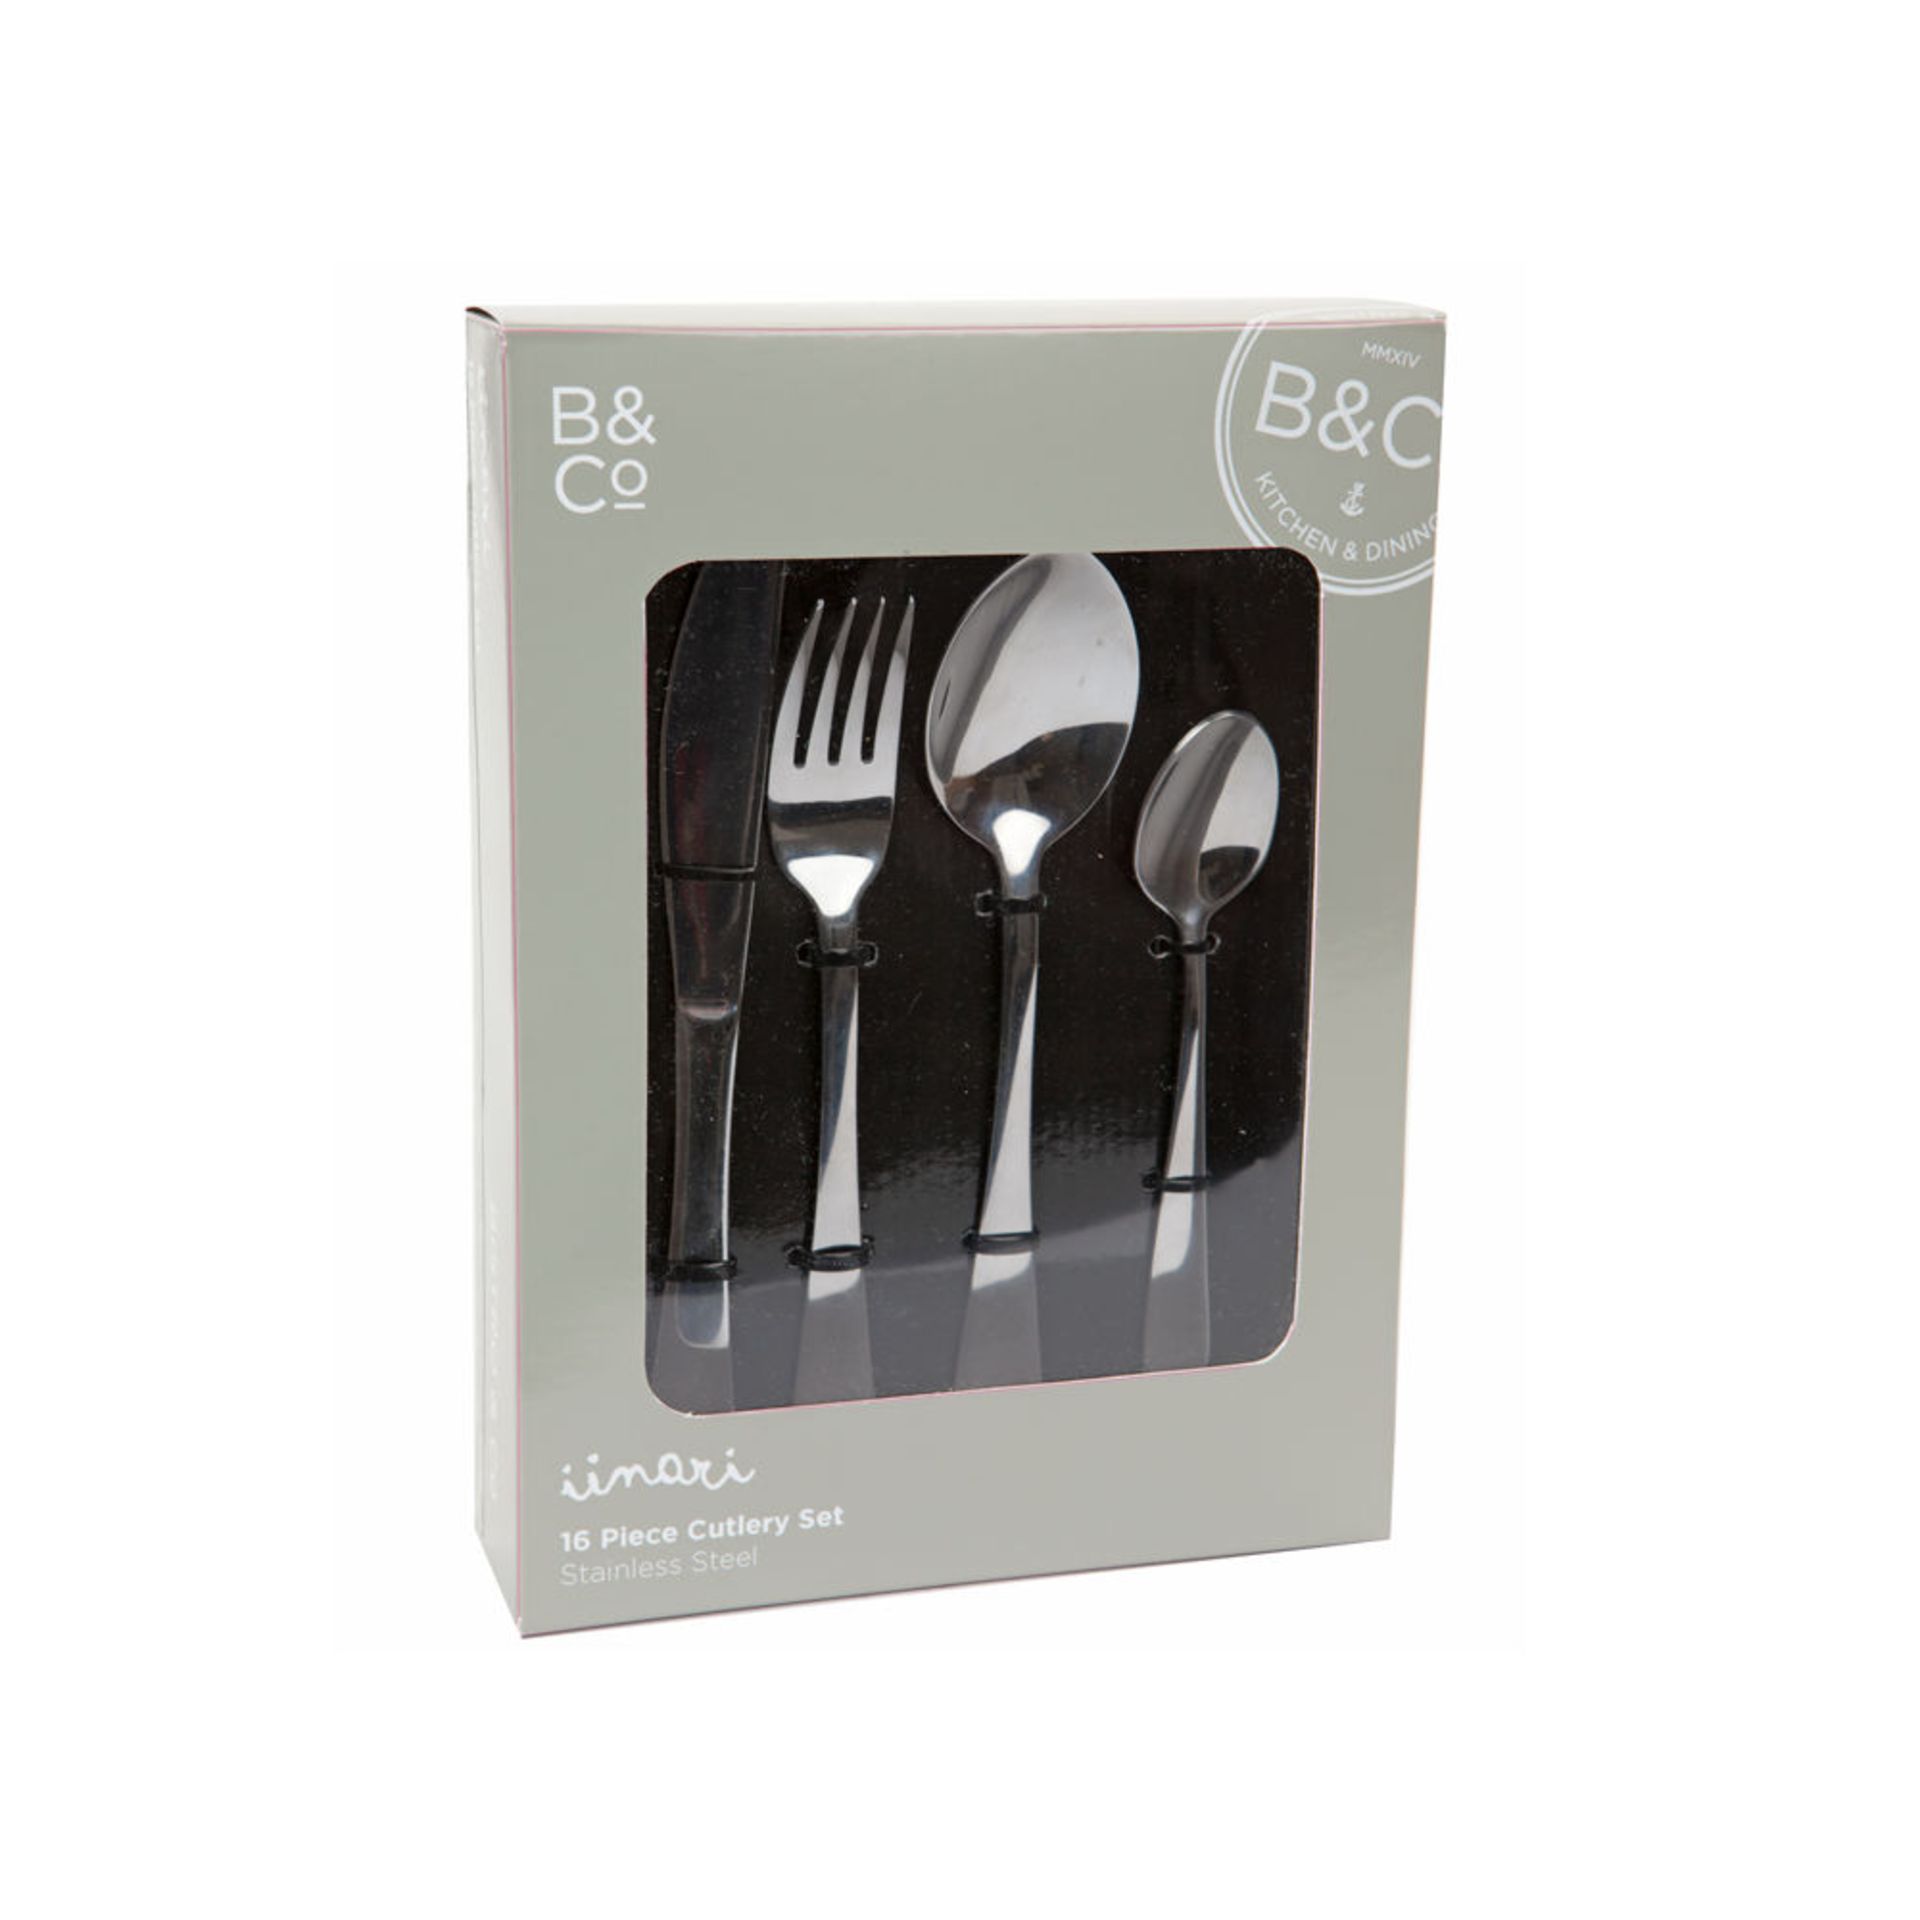 V *TRADE QTY* Brand New Bistro & Co Linari 16 Piece Stainless Steel Cutlery Set X 10 YOUR BID